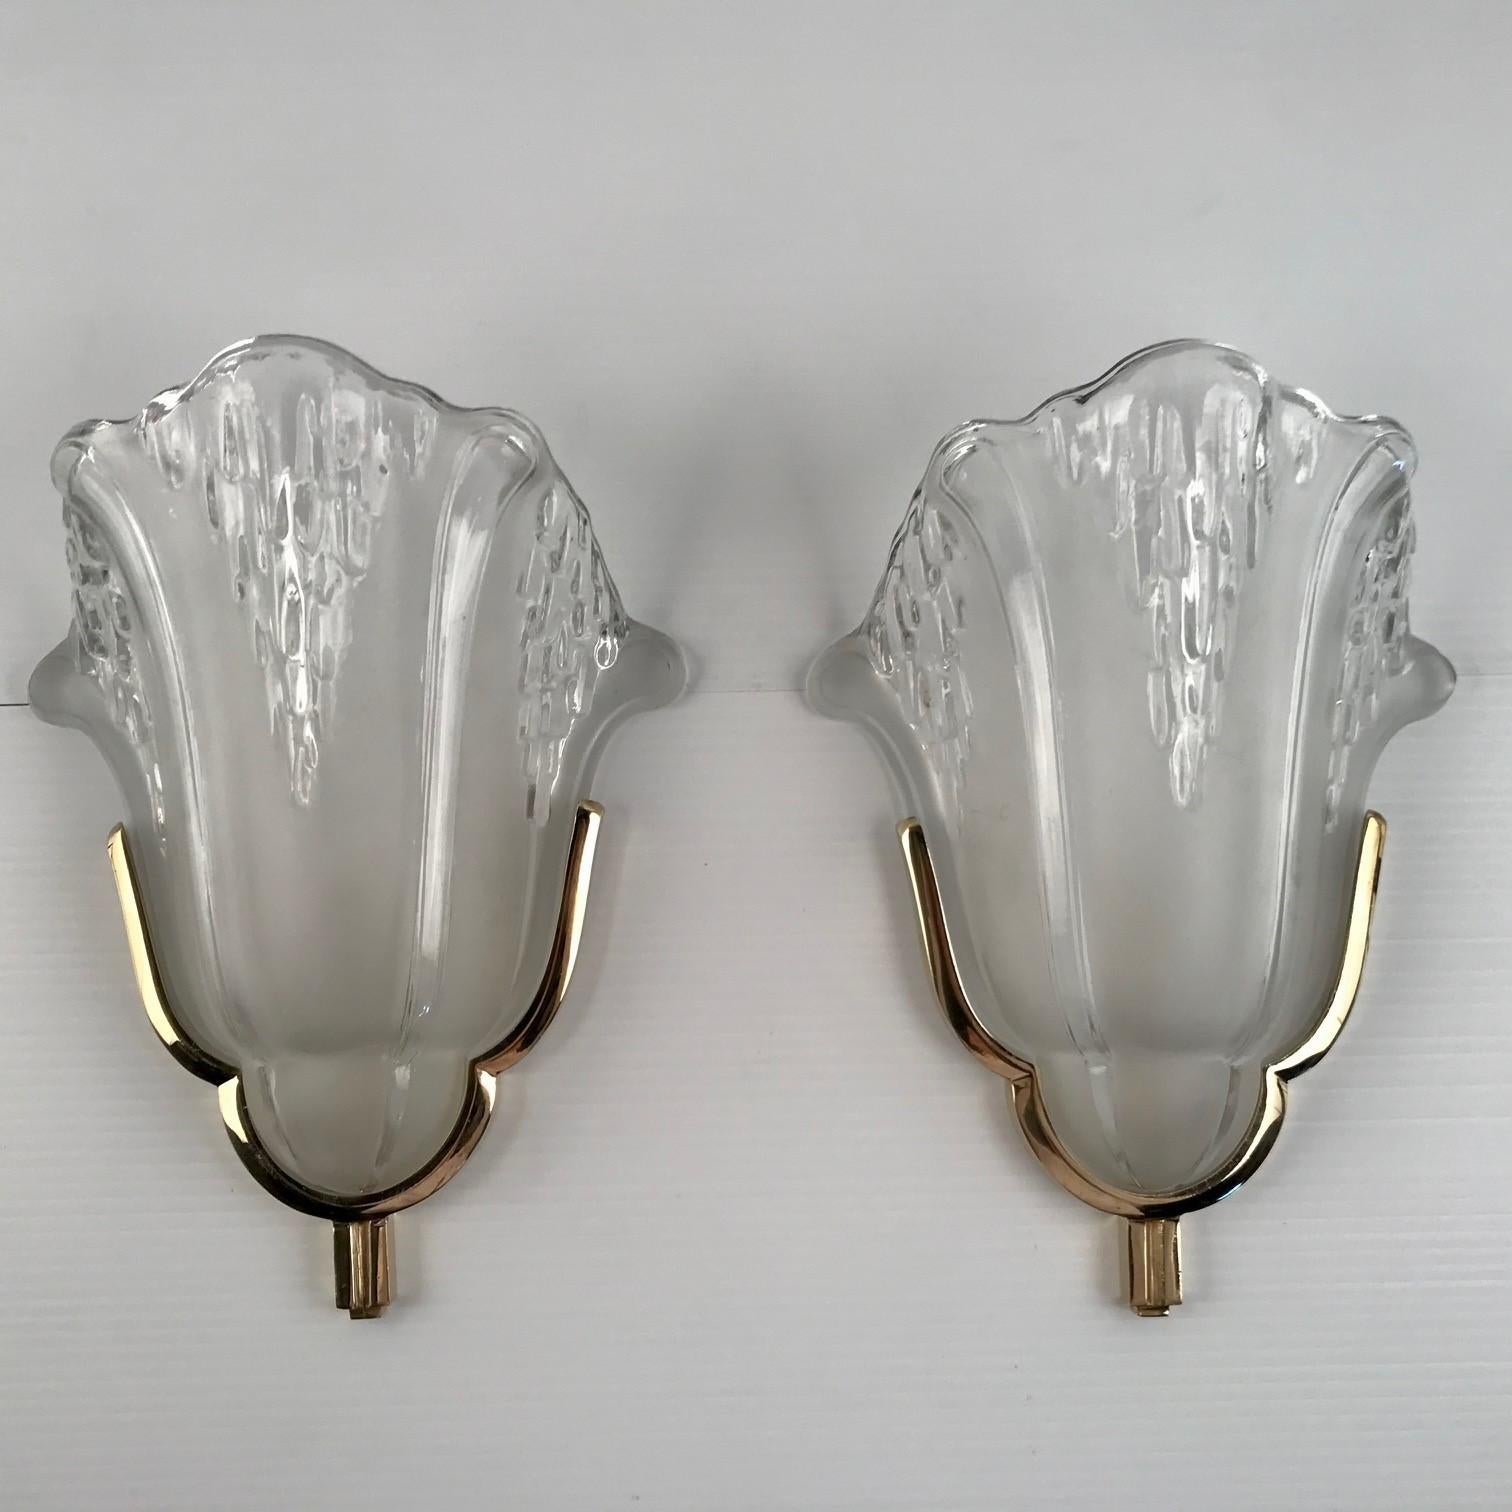 A wonderful set of four french art deco wall sconces in polished brass. All four glass shades are marked “PETITOT FRANCE”. And the Petitot brass is marked and numbered on the back. A very nice and extremely hard to find model from the mid 30ties.